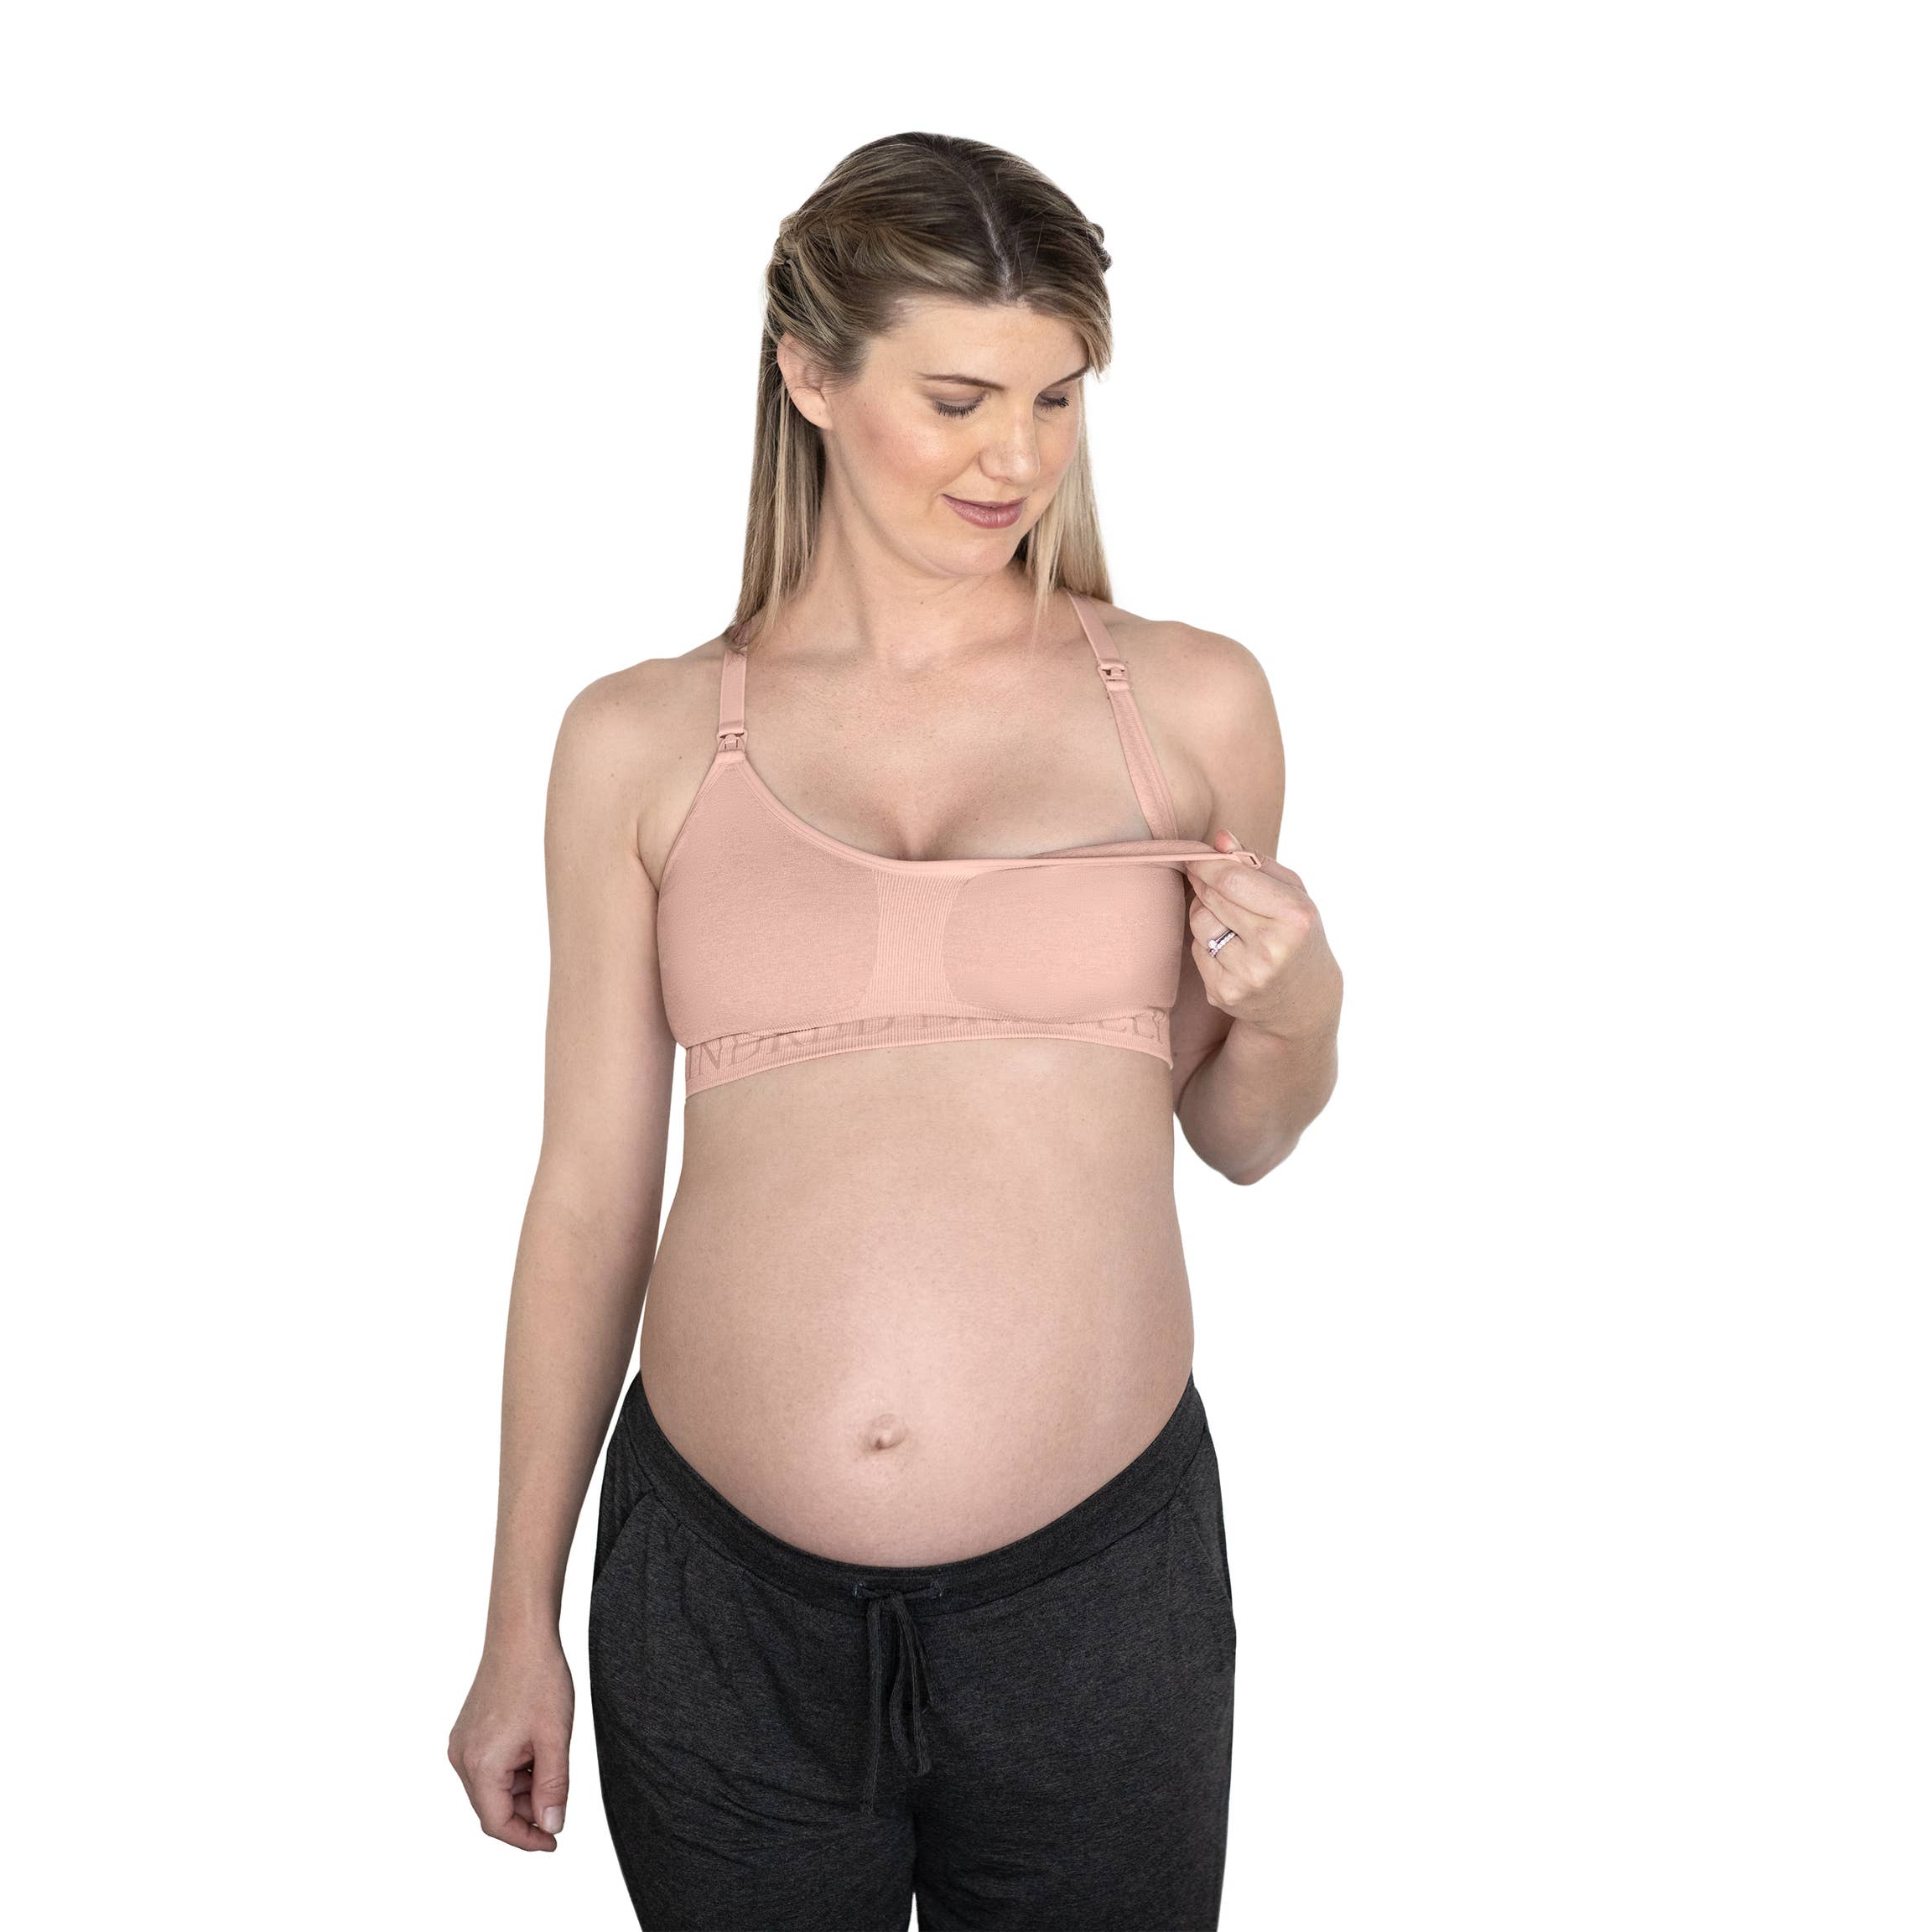 Kindred Bravely - Sublime Support Low Impact Nursing & Maternity